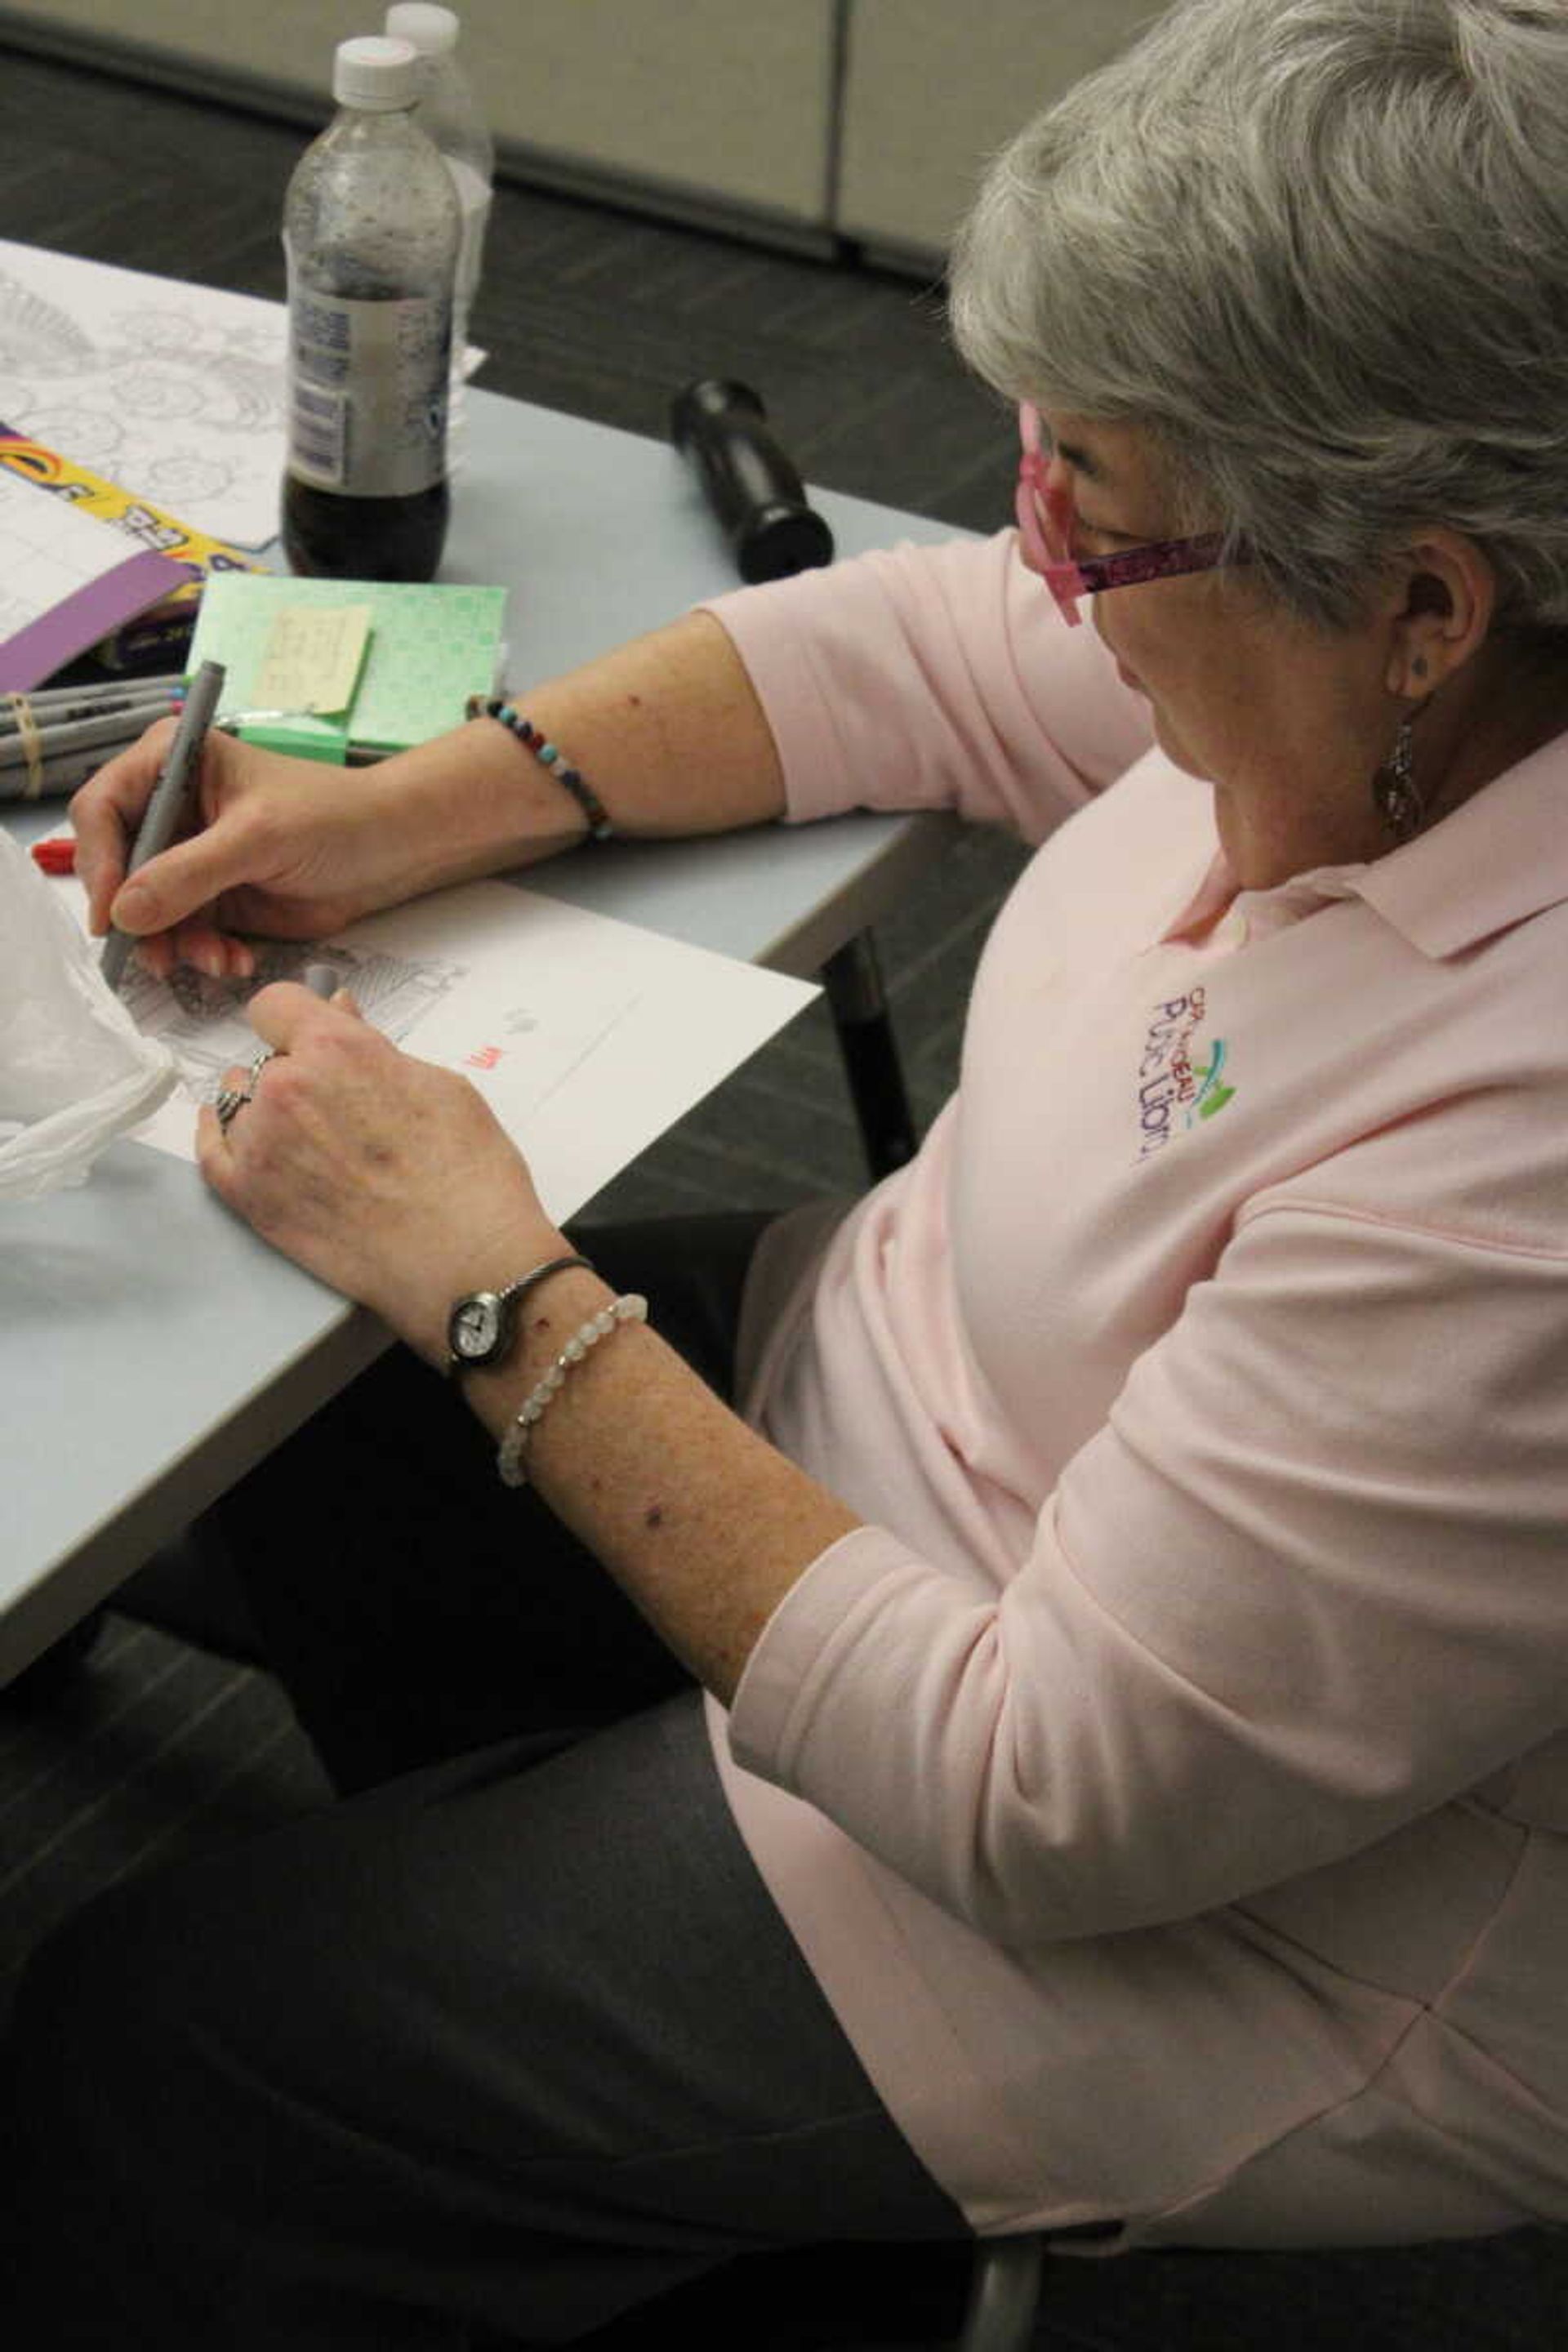 Marilyn Hutchings colors in her design at Cape Girardeau Public Library’s “Coloring for Adults” event on Oct. 24.